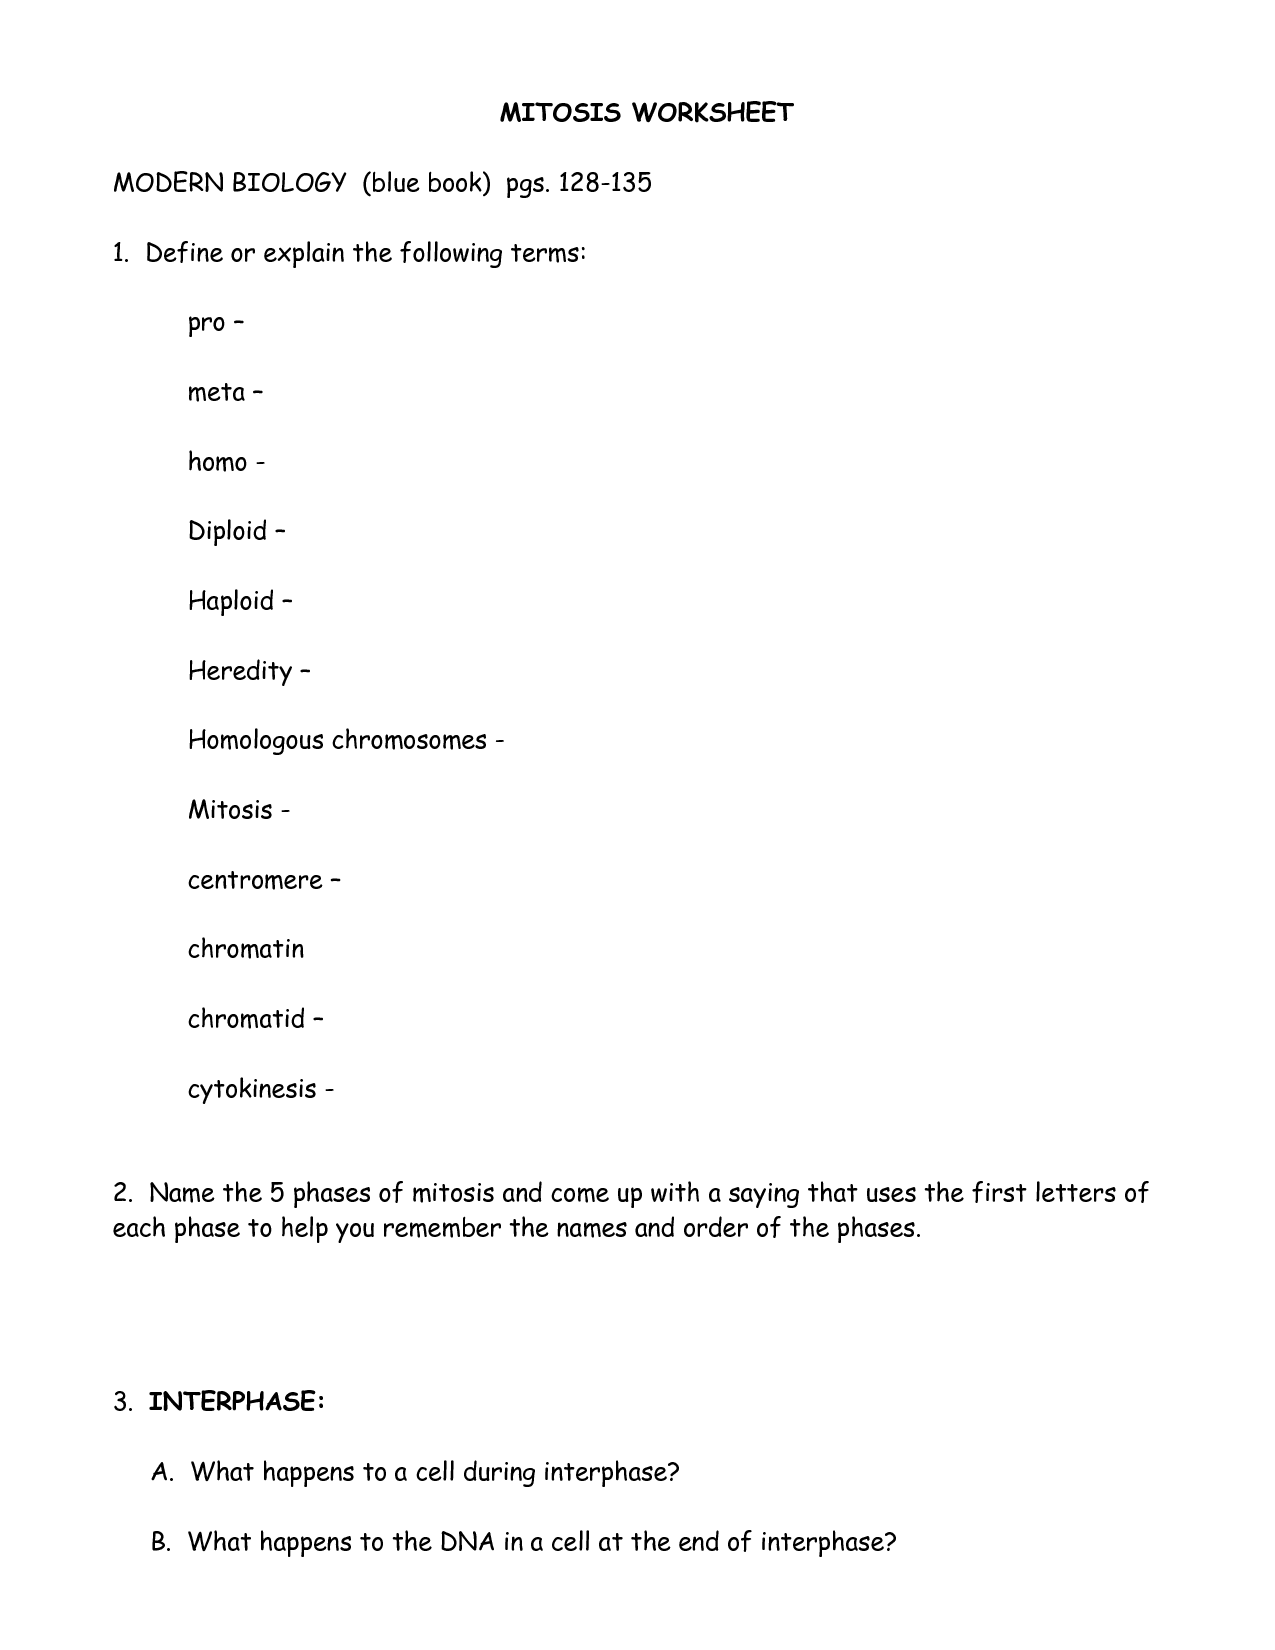 Cellsalive Meiosis Worksheet Answers Image